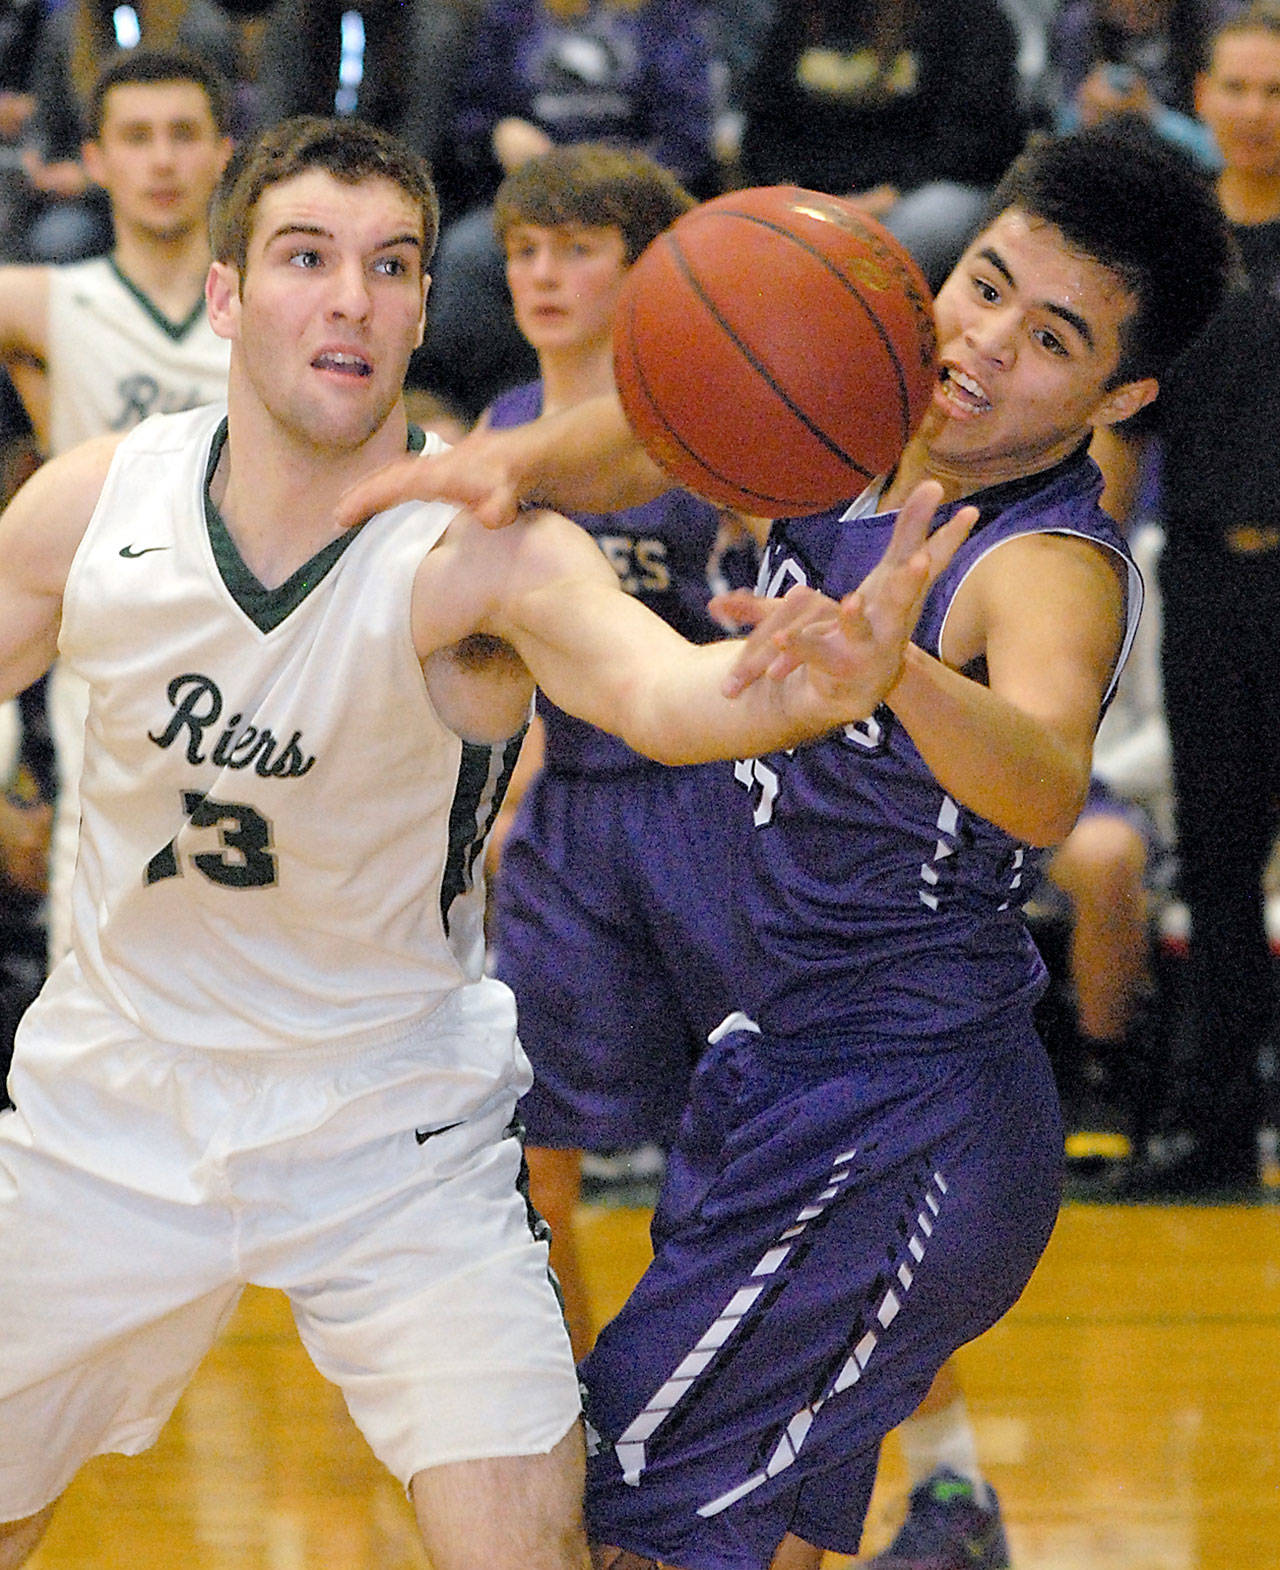 Keith Thorpe/Peninsula Daily News Port Angeles’ Garrett Edwards, right, fights for a rebound with Sequim’s Rigo Langston during the second quarter on Tuesday in Port Angeles.